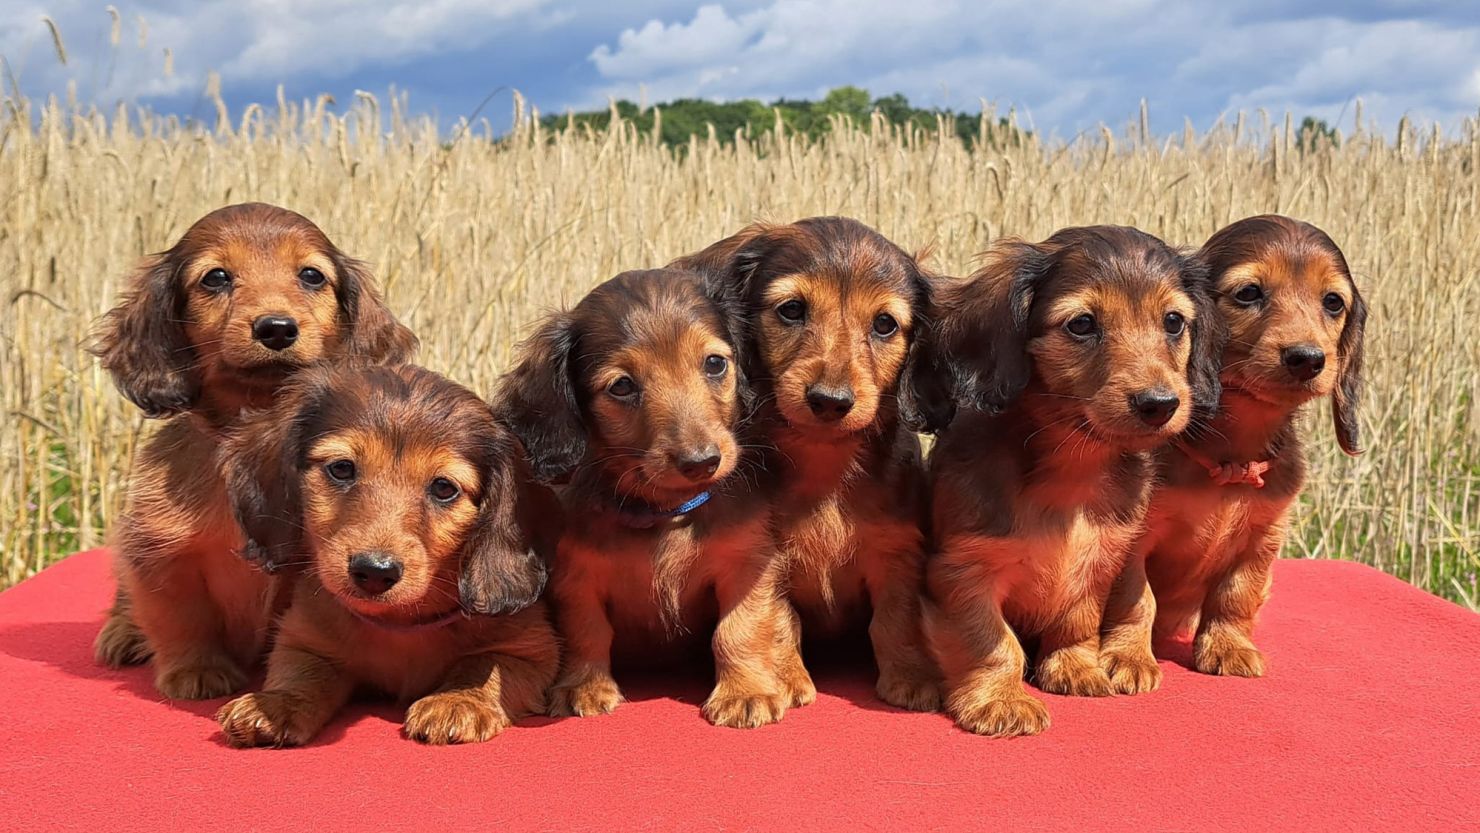 A new draft law looks to prohibit the breeding of dogs with “skeletal anomalies,” such as dachshunds.